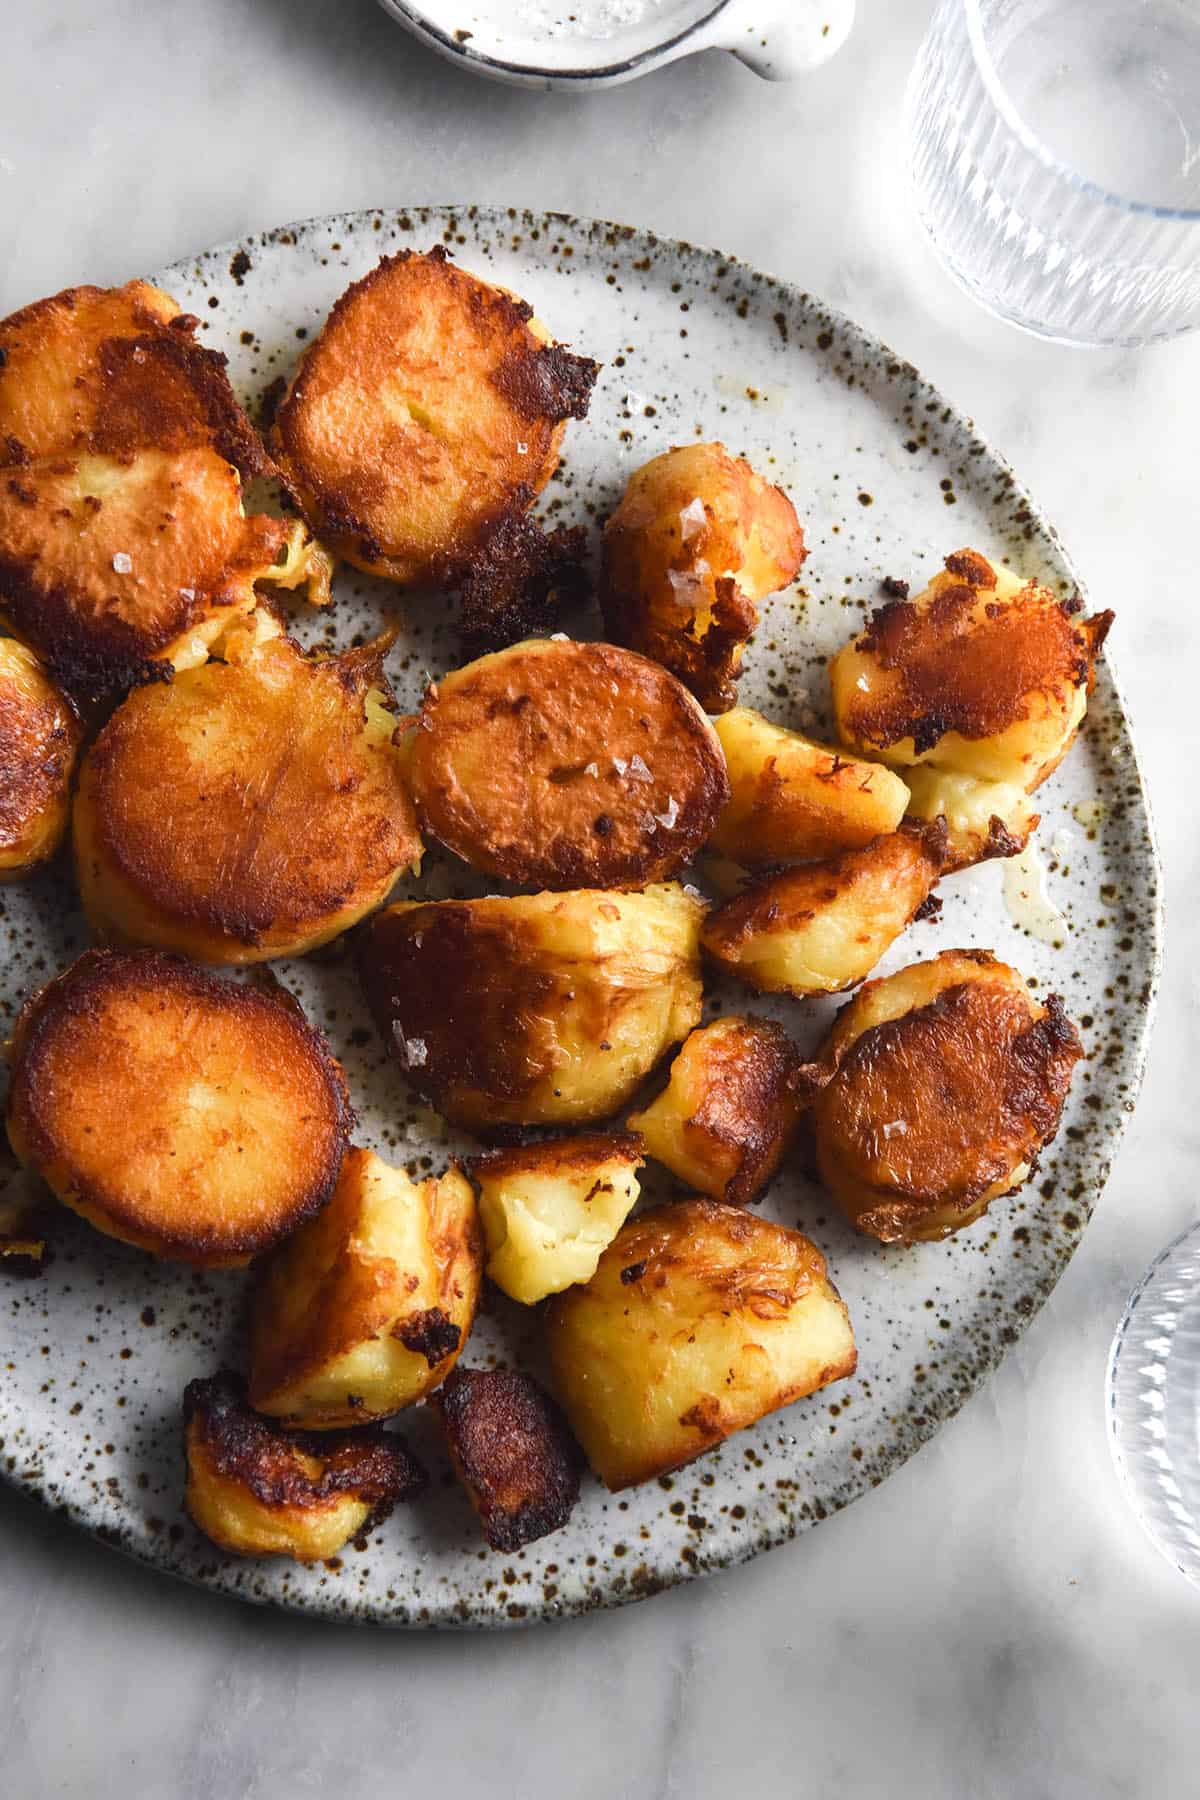 An aerial photo of a white speckled ceramic plate topped with crispy roast potatoes. The potatoes are golden brown, super crispy and topped with flaky sea salt. The scene is set on a white marble table with water glasses and salt bowls surrounding the plate of potatoes.